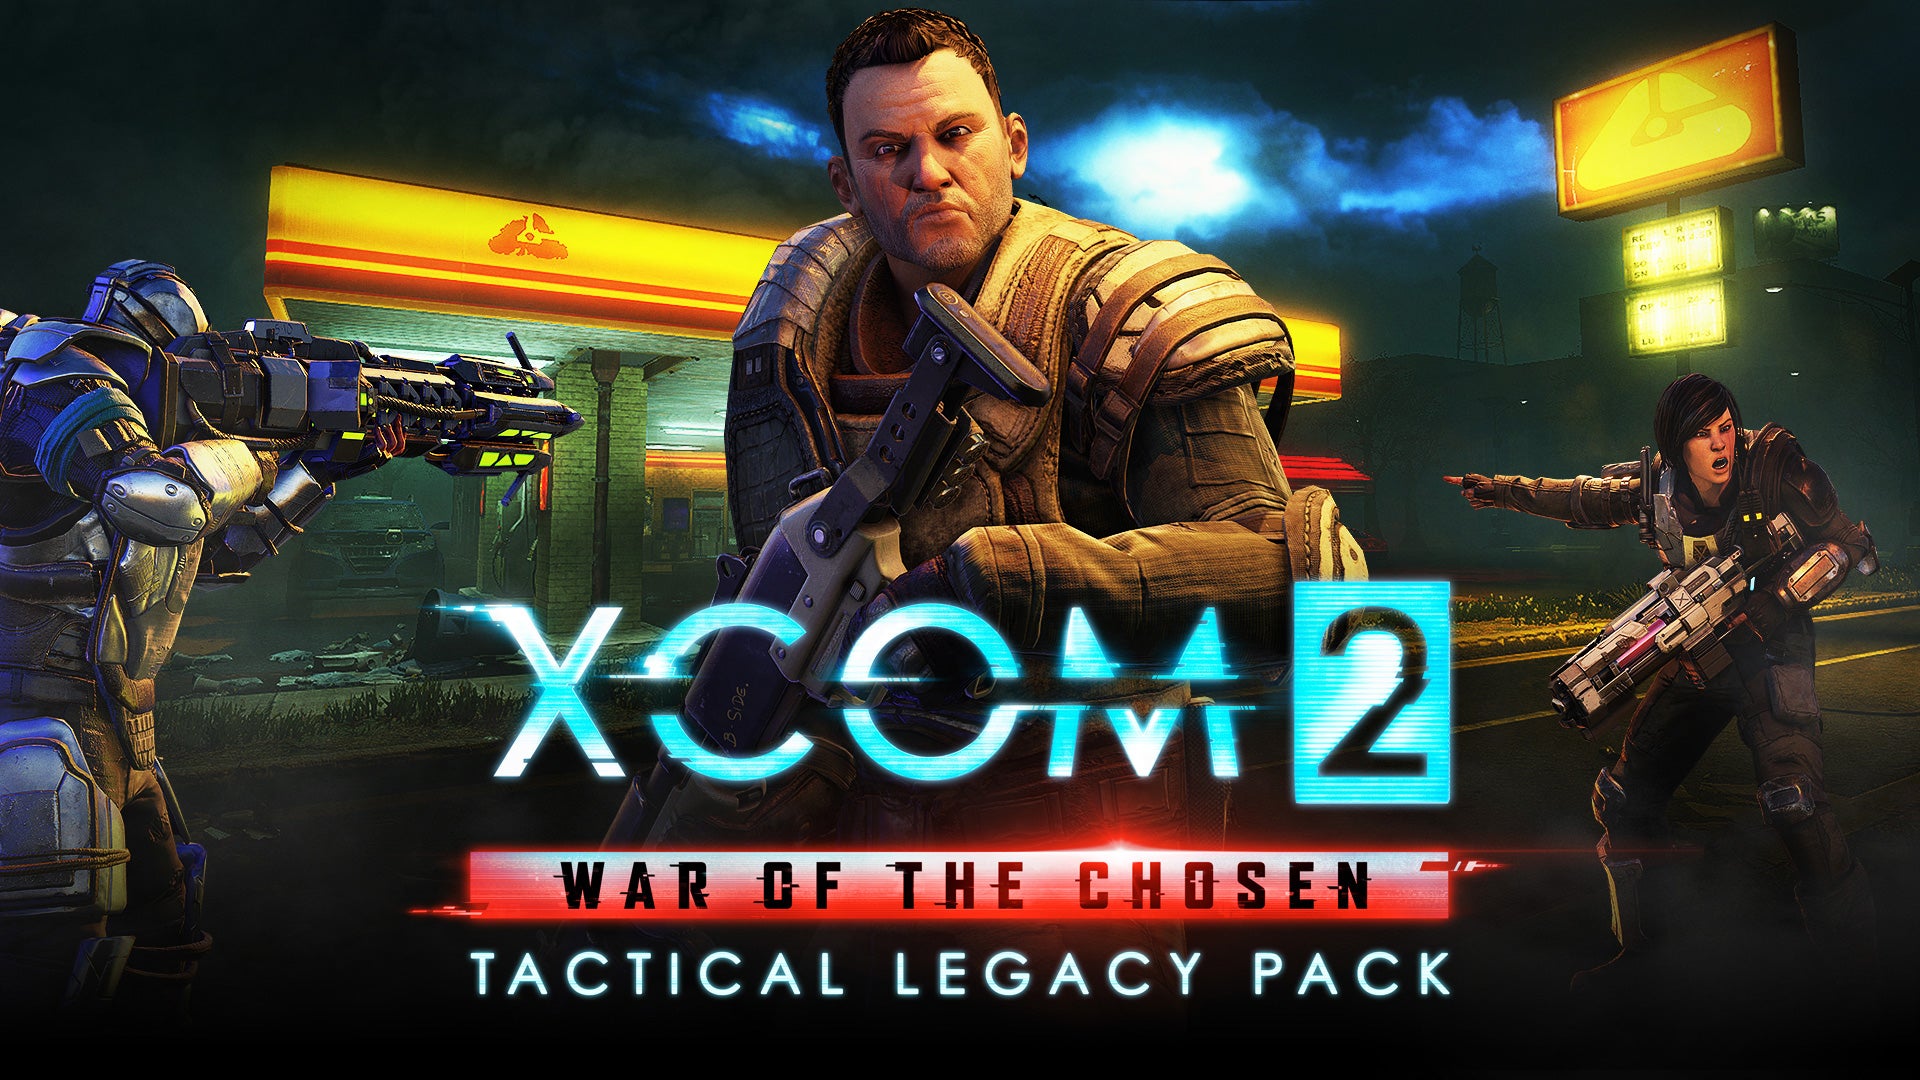 Image for XCOM 2 Tactical Legacy Pack is great for fans - but is also likely a glimpse into XCOM's future